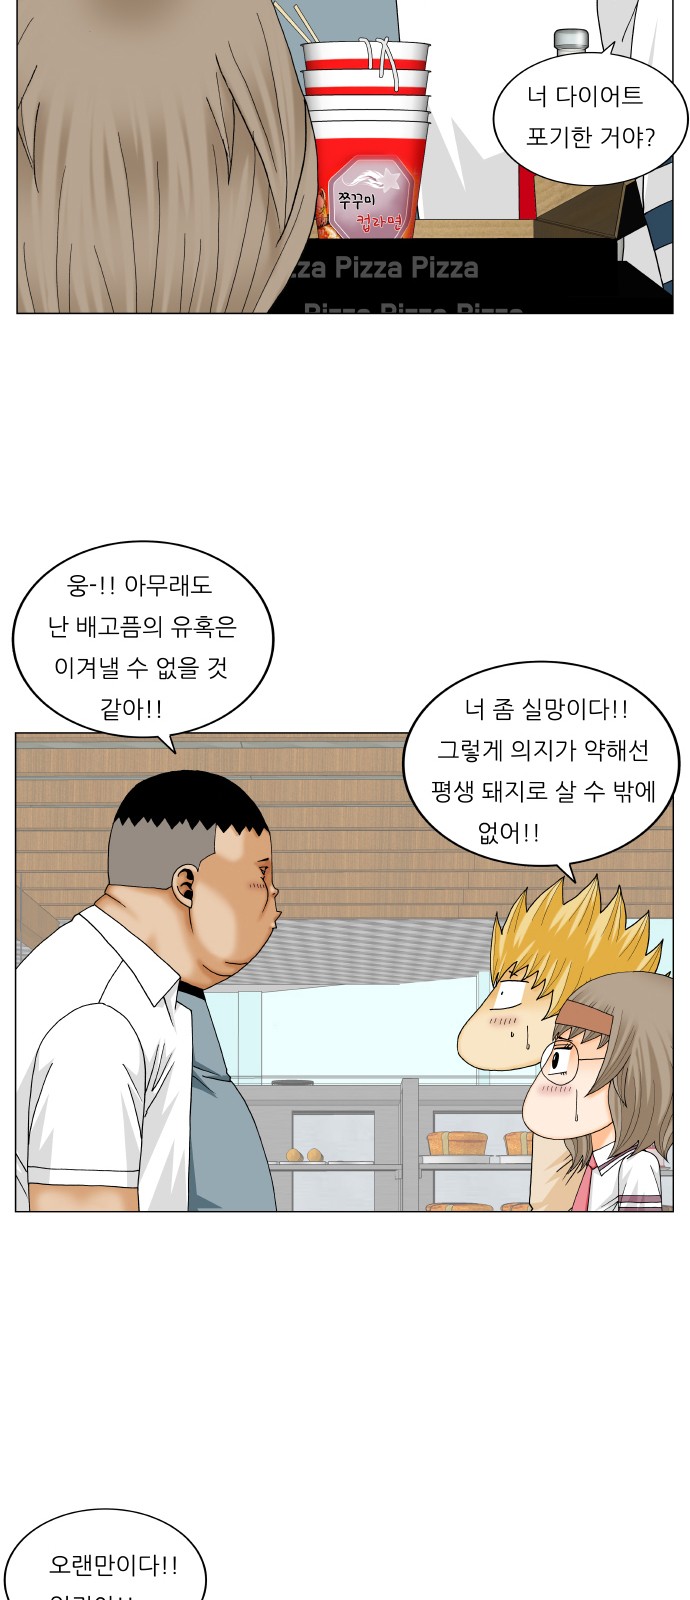 Ultimate Legend - Kang Hae Hyo - Chapter 248 - Page 3